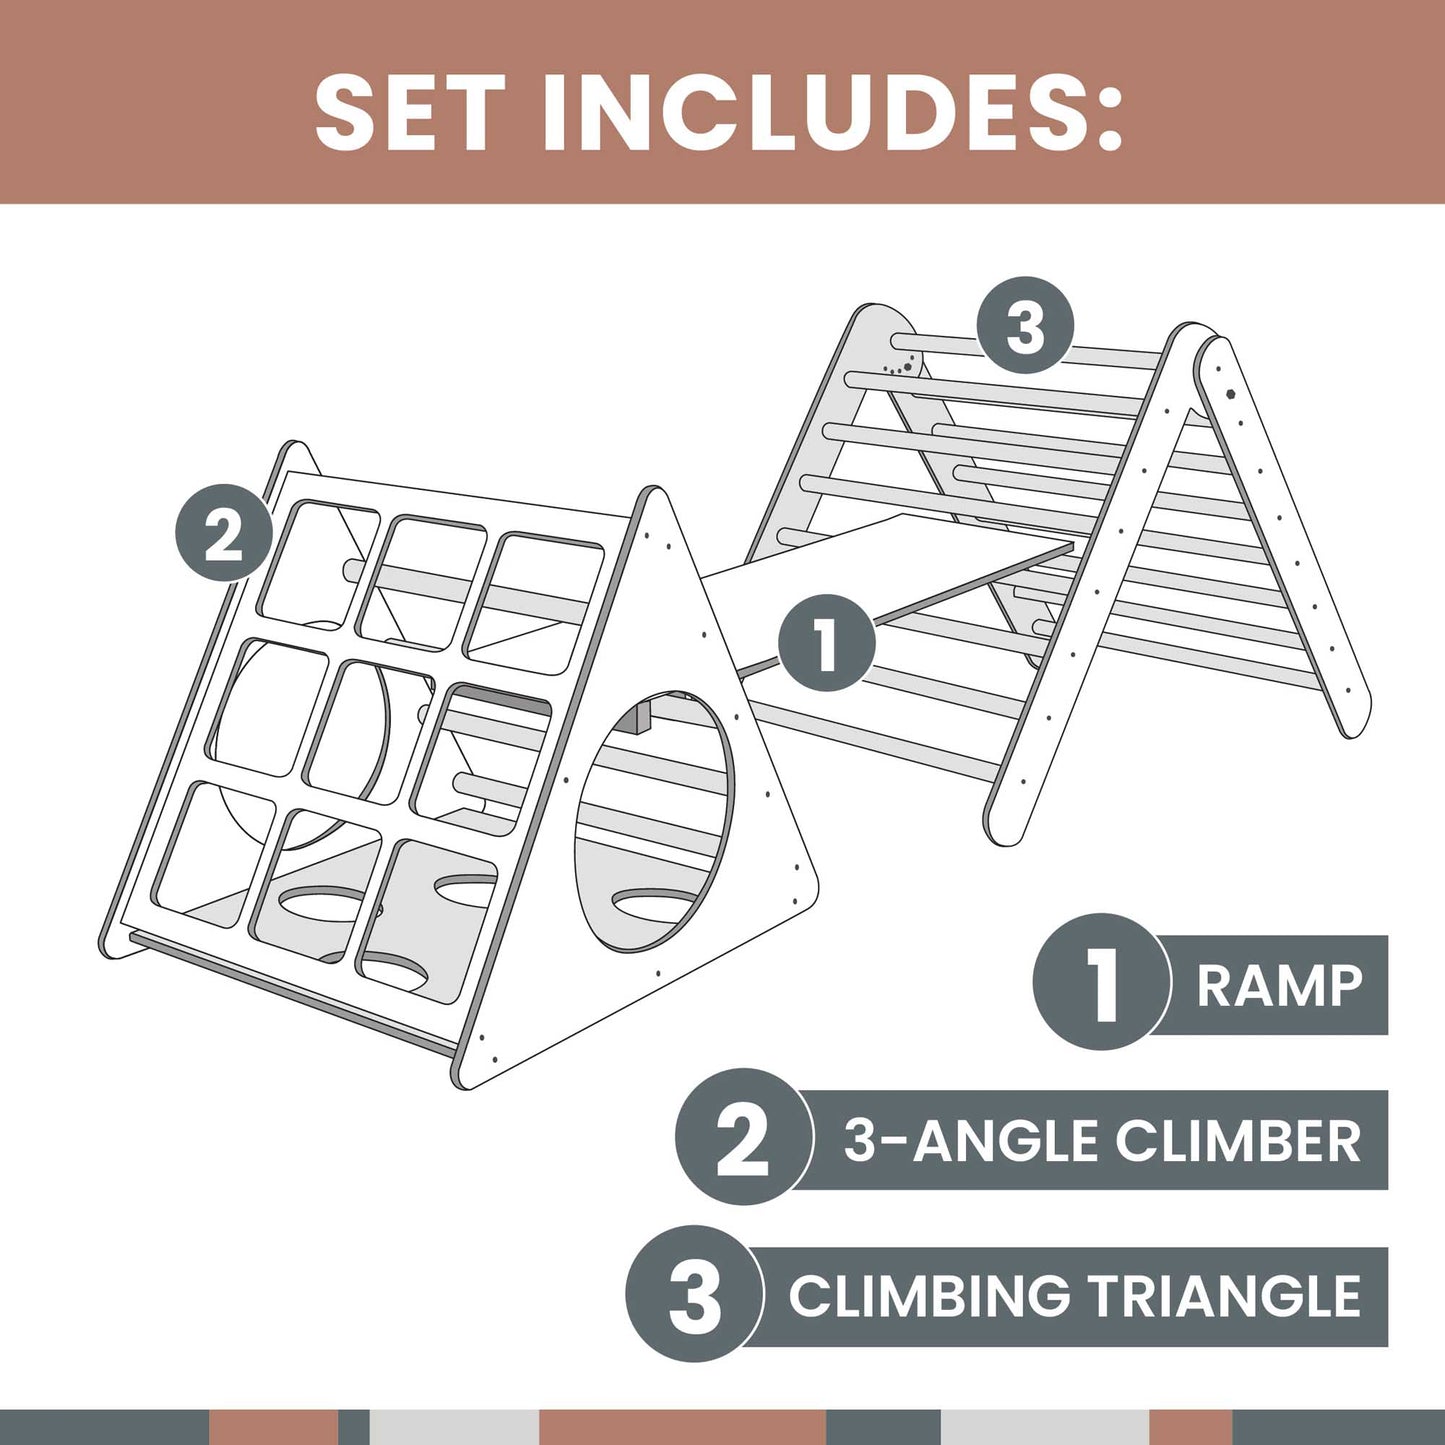 The set includes a Sweet Home From Wood Climbing Triangle, a Sweet Home From Wood Foldable Climbing Triangle, and a ramp.